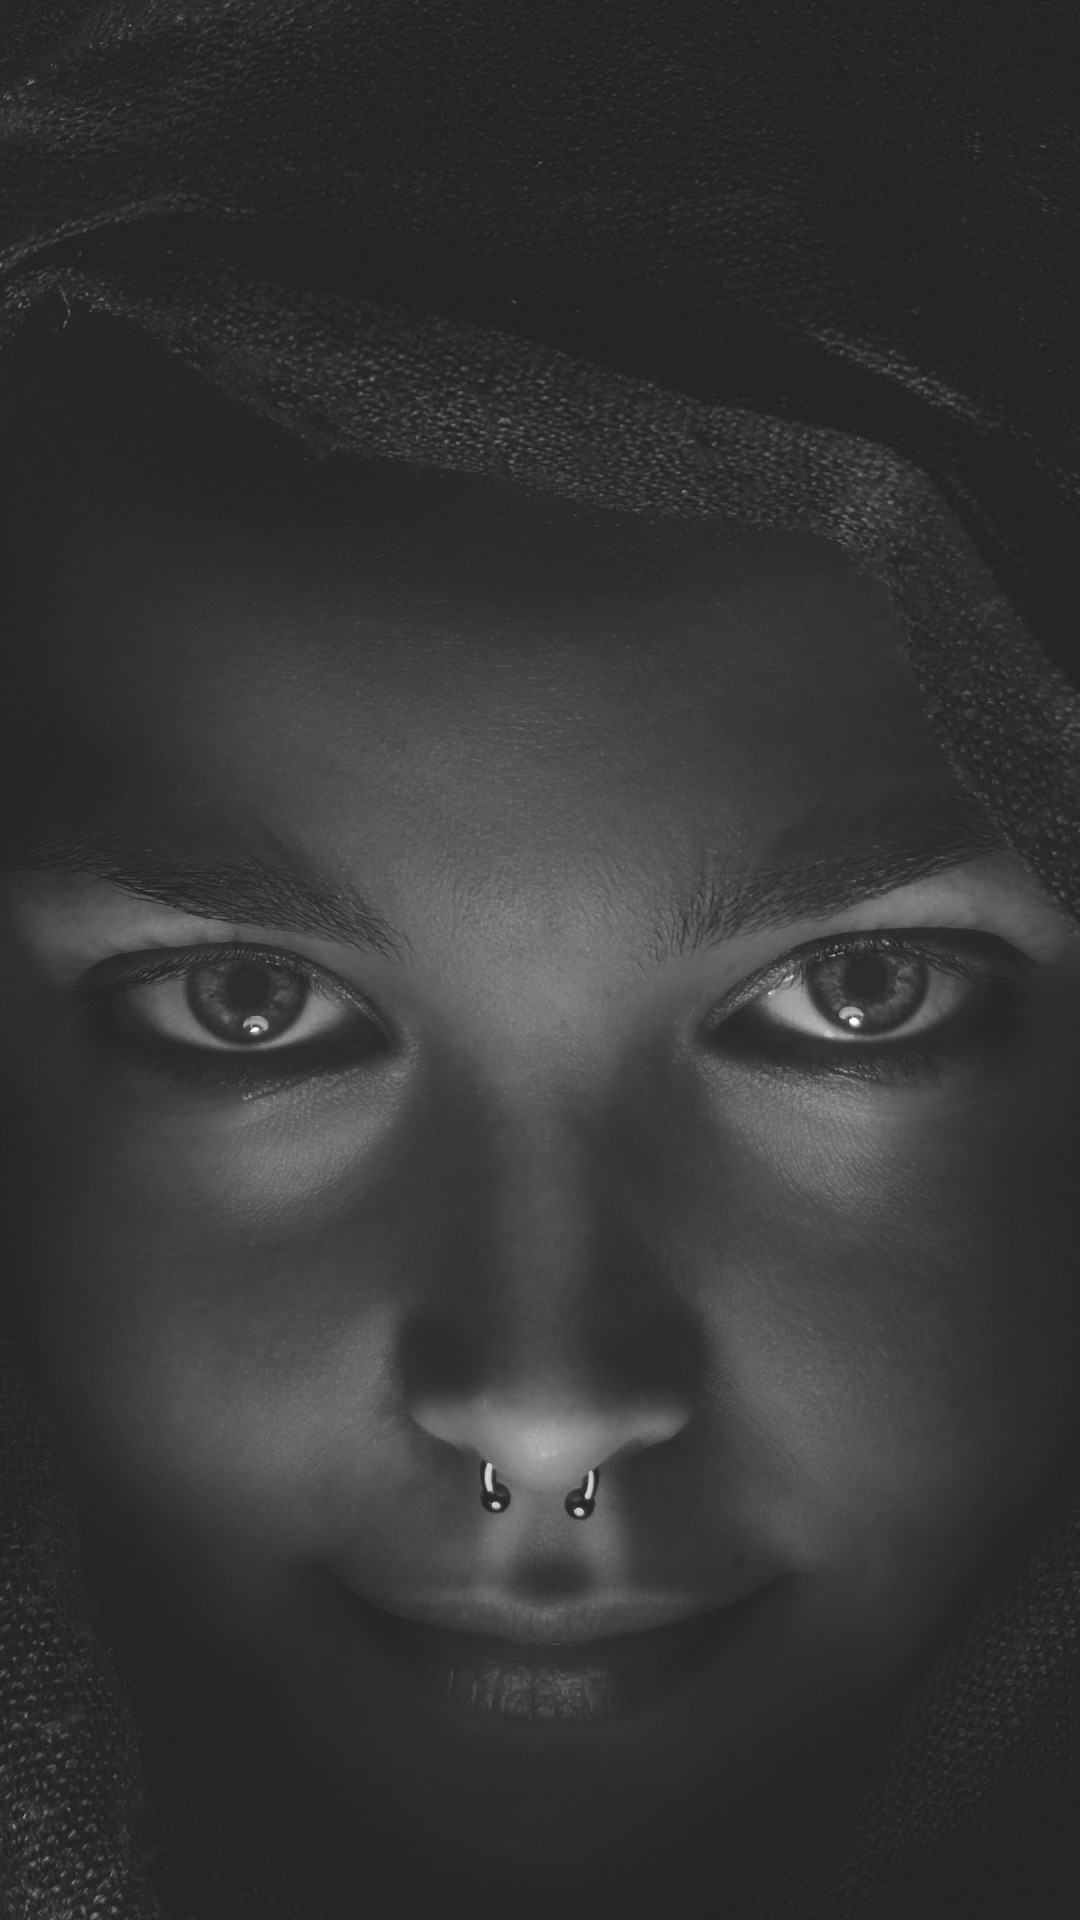 Girl with piercing wallpaper 1080x1920